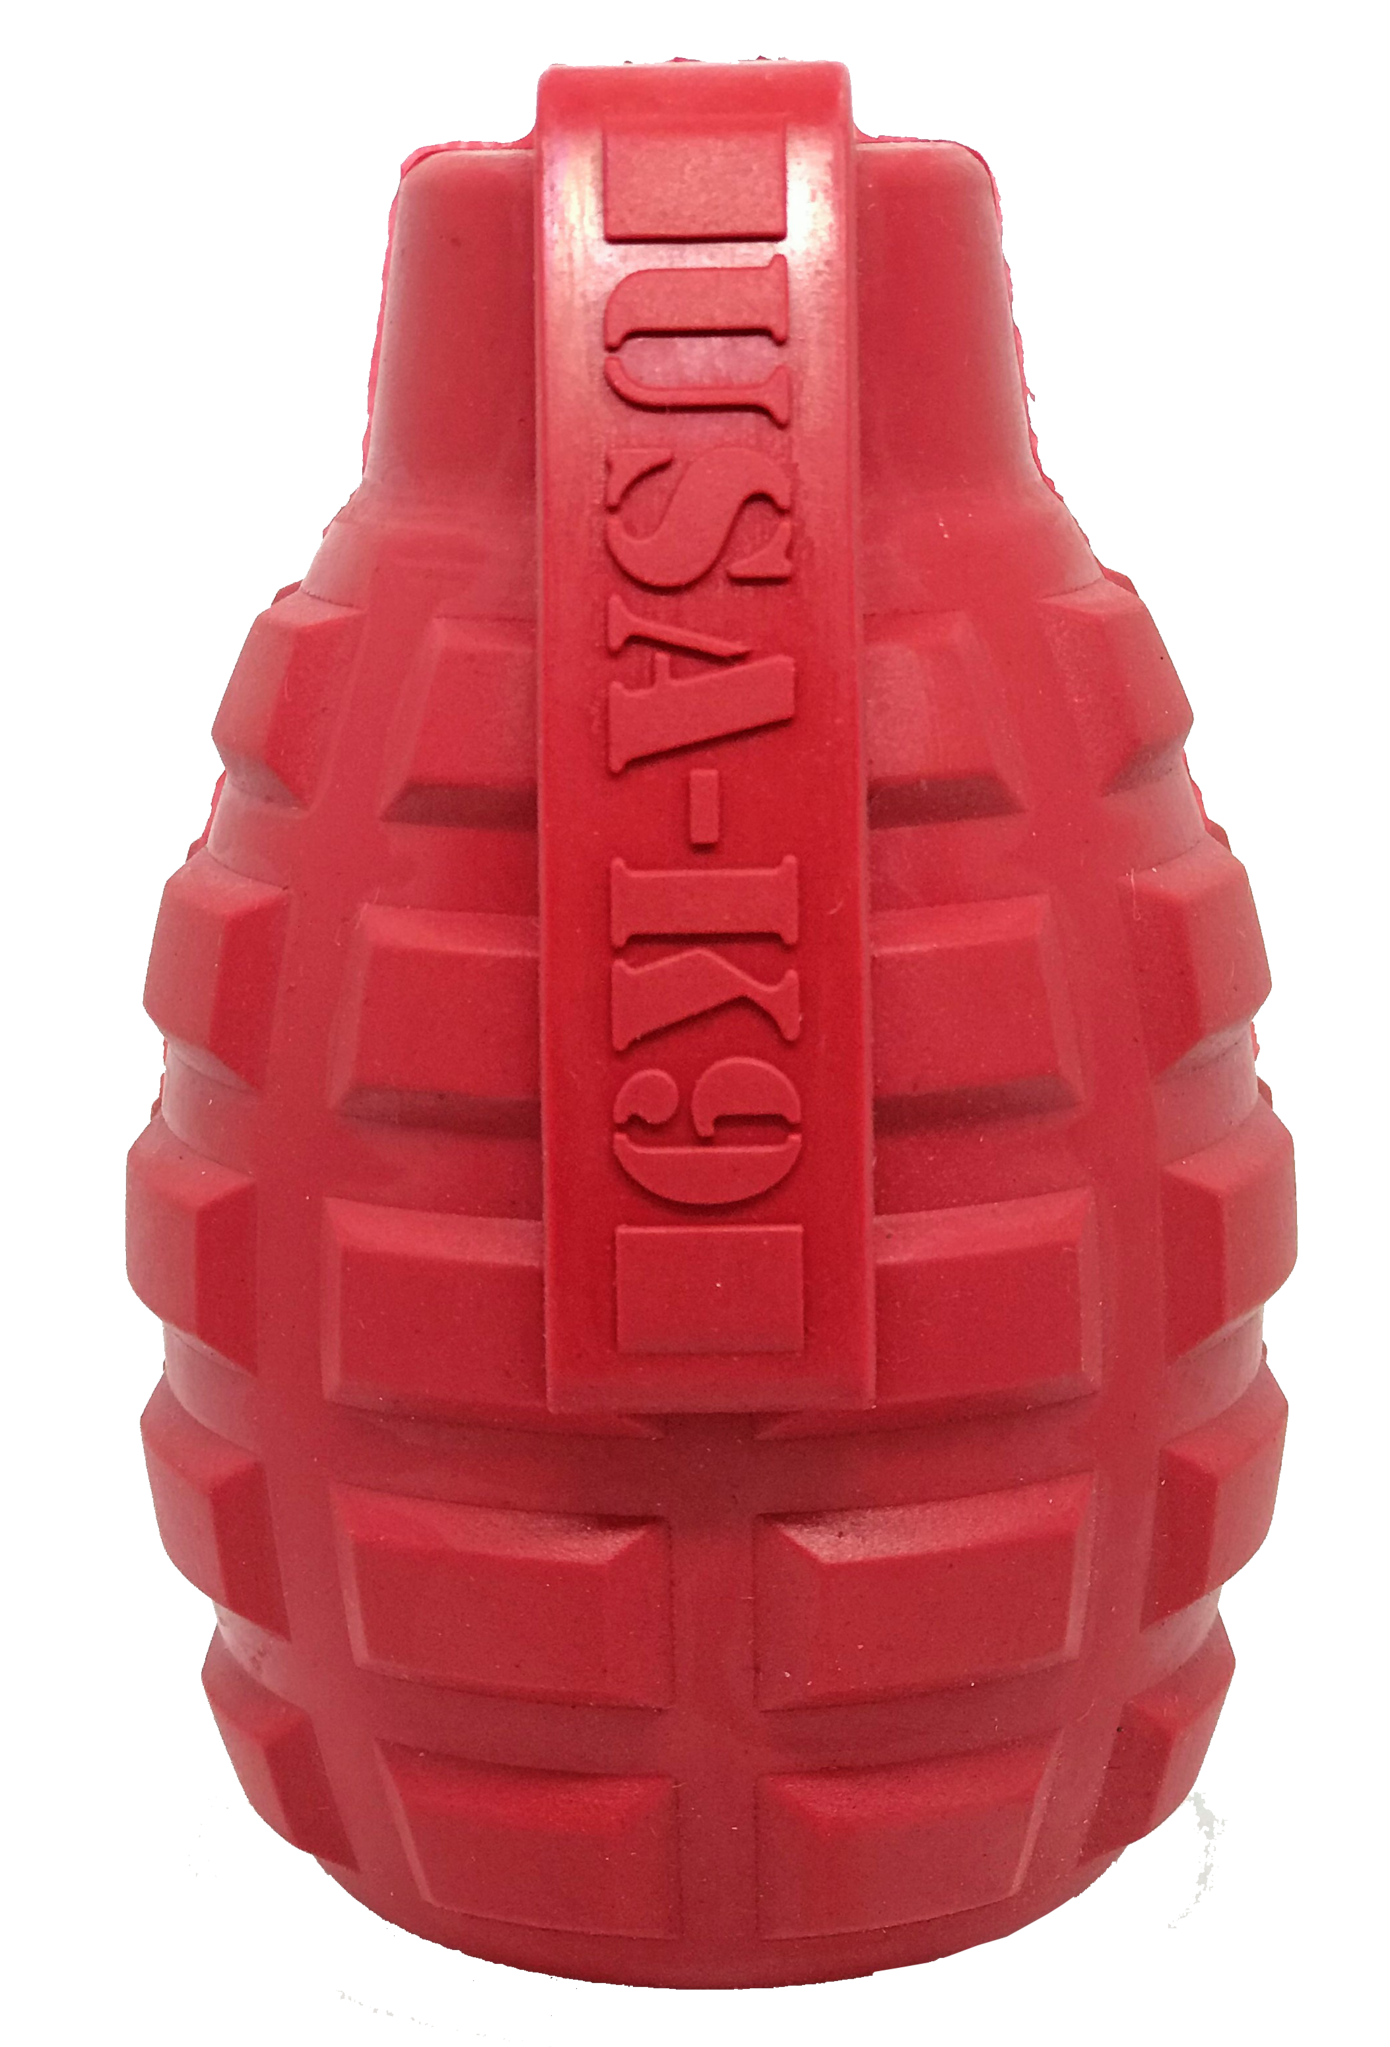 A red CLEARANCE: Soda Pup GRENADE TOY & TREAT DISPENSER (M&L) with the word grenade on it, designed as a durable chew toy for dog enrichment by Your Whole Dog.